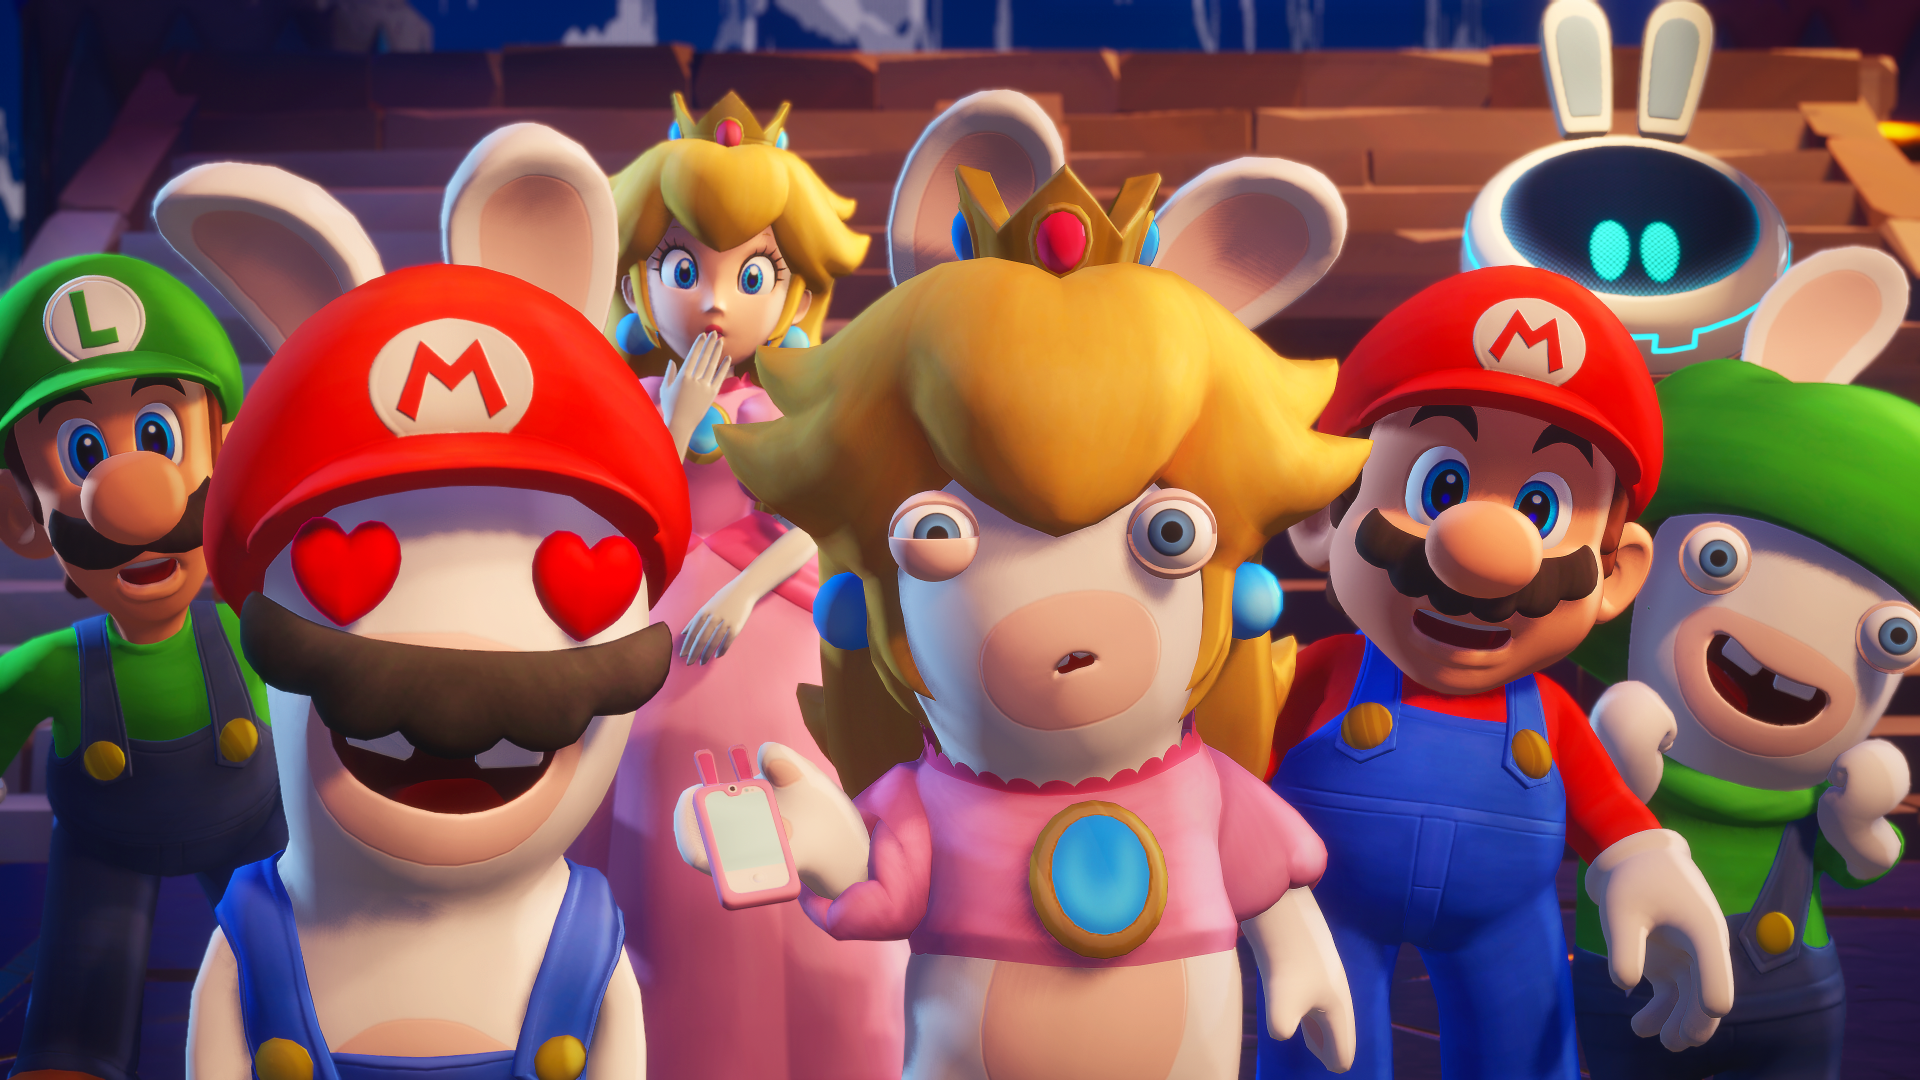 Mario and company stare in awe of Edge (offscreen), though Rabbid Peach is dumbfounded she is no longer the center of attention via Mario + Rabbids Sparks of Hope (2022), Ubisoft